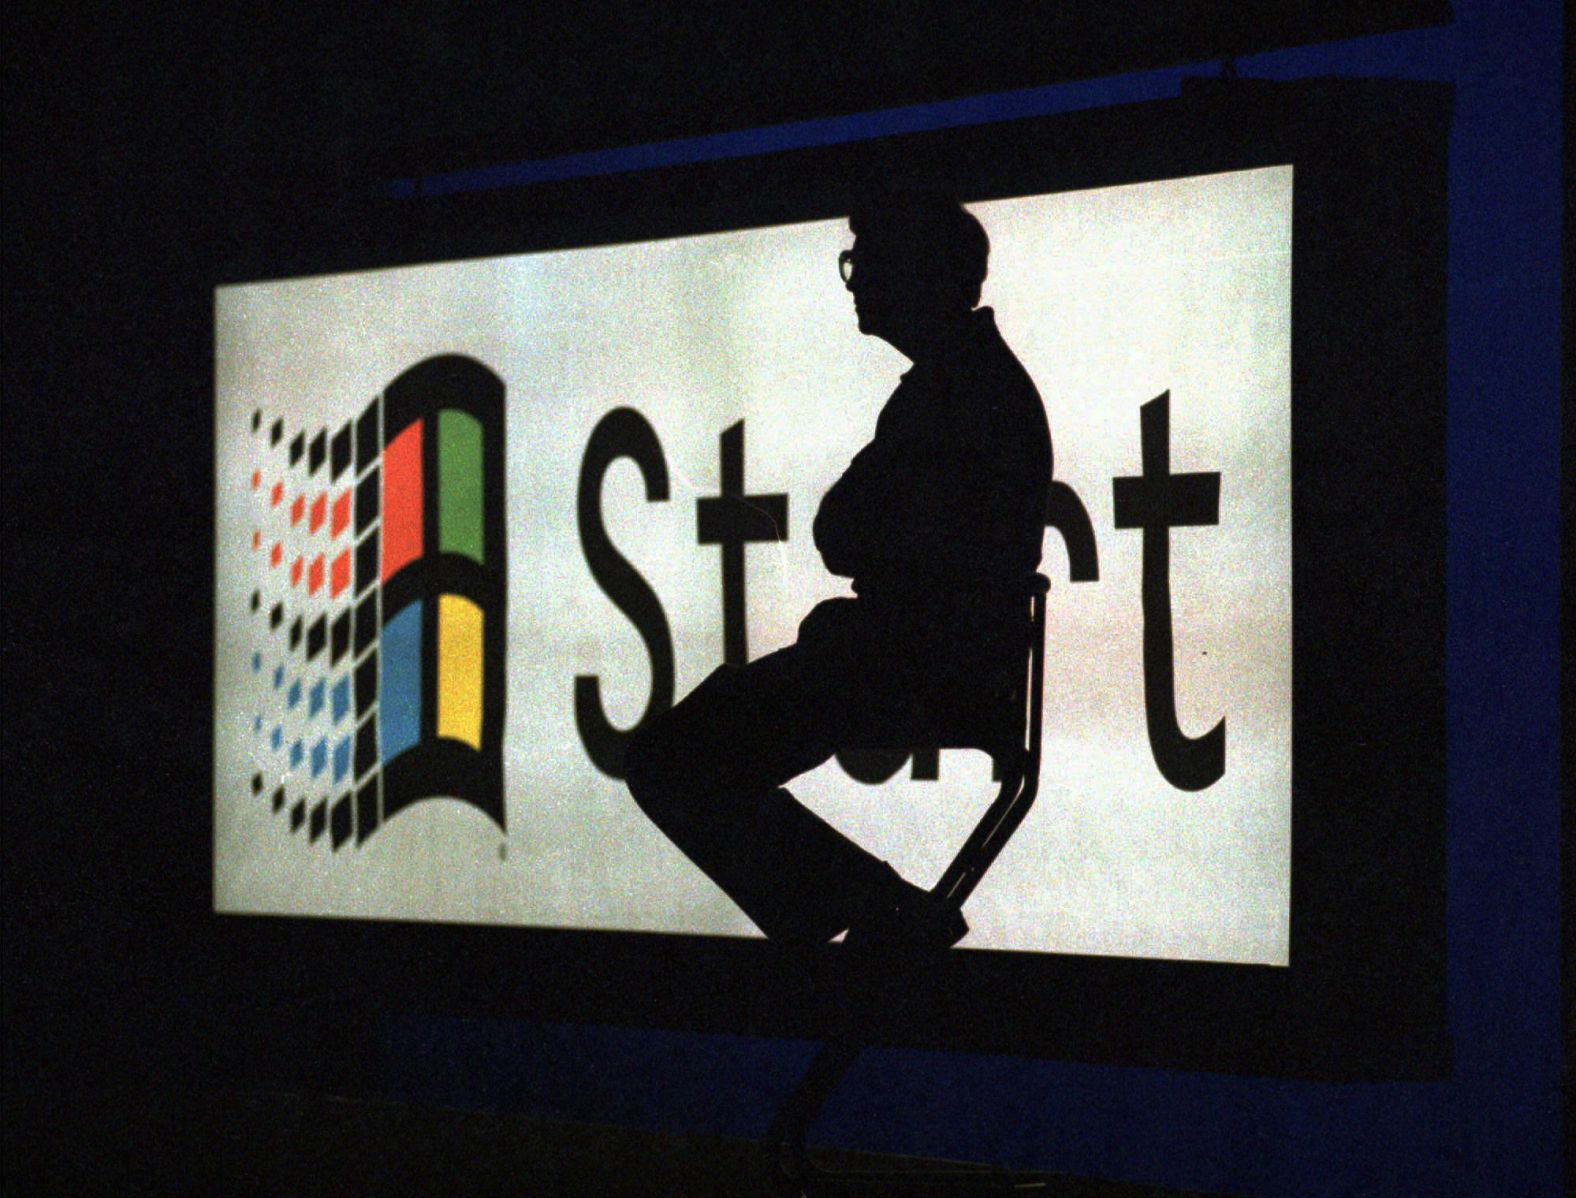 Gates sits on a stage in Redmond, Washington, during a launch event for the Windows 95 operating system. Microsoft, with its MS-DOS system and later the Windows platform, was the first company to dominate the personal computer market.